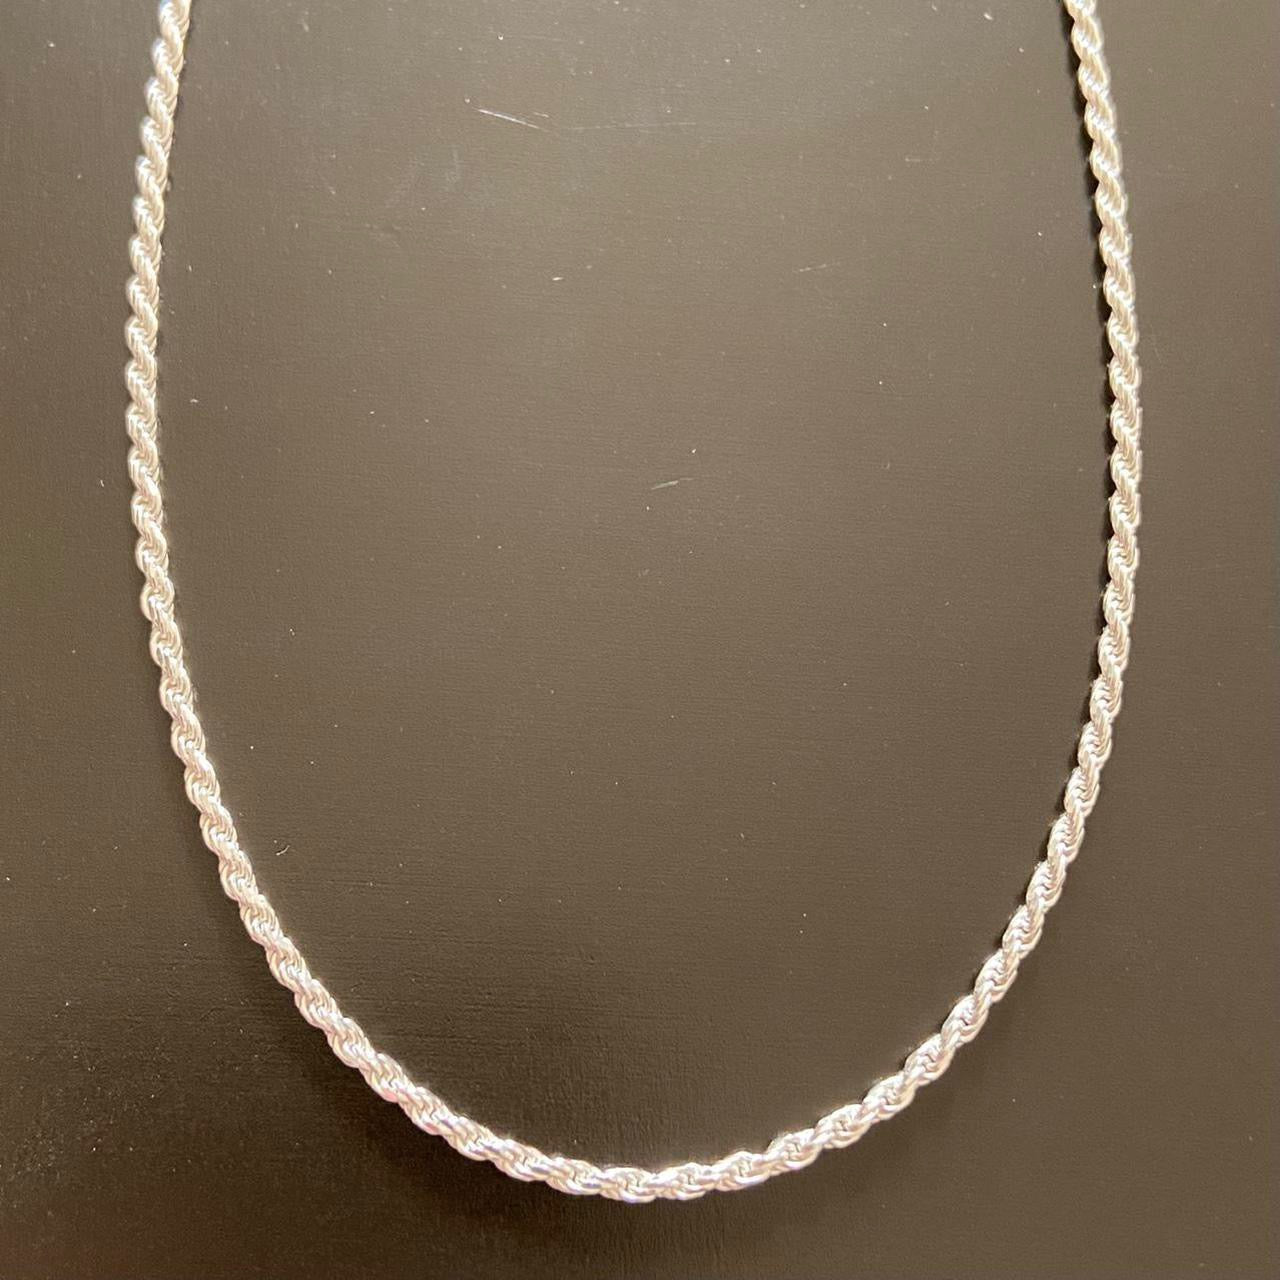 Solid Silver Rope Chain 16in 2mm